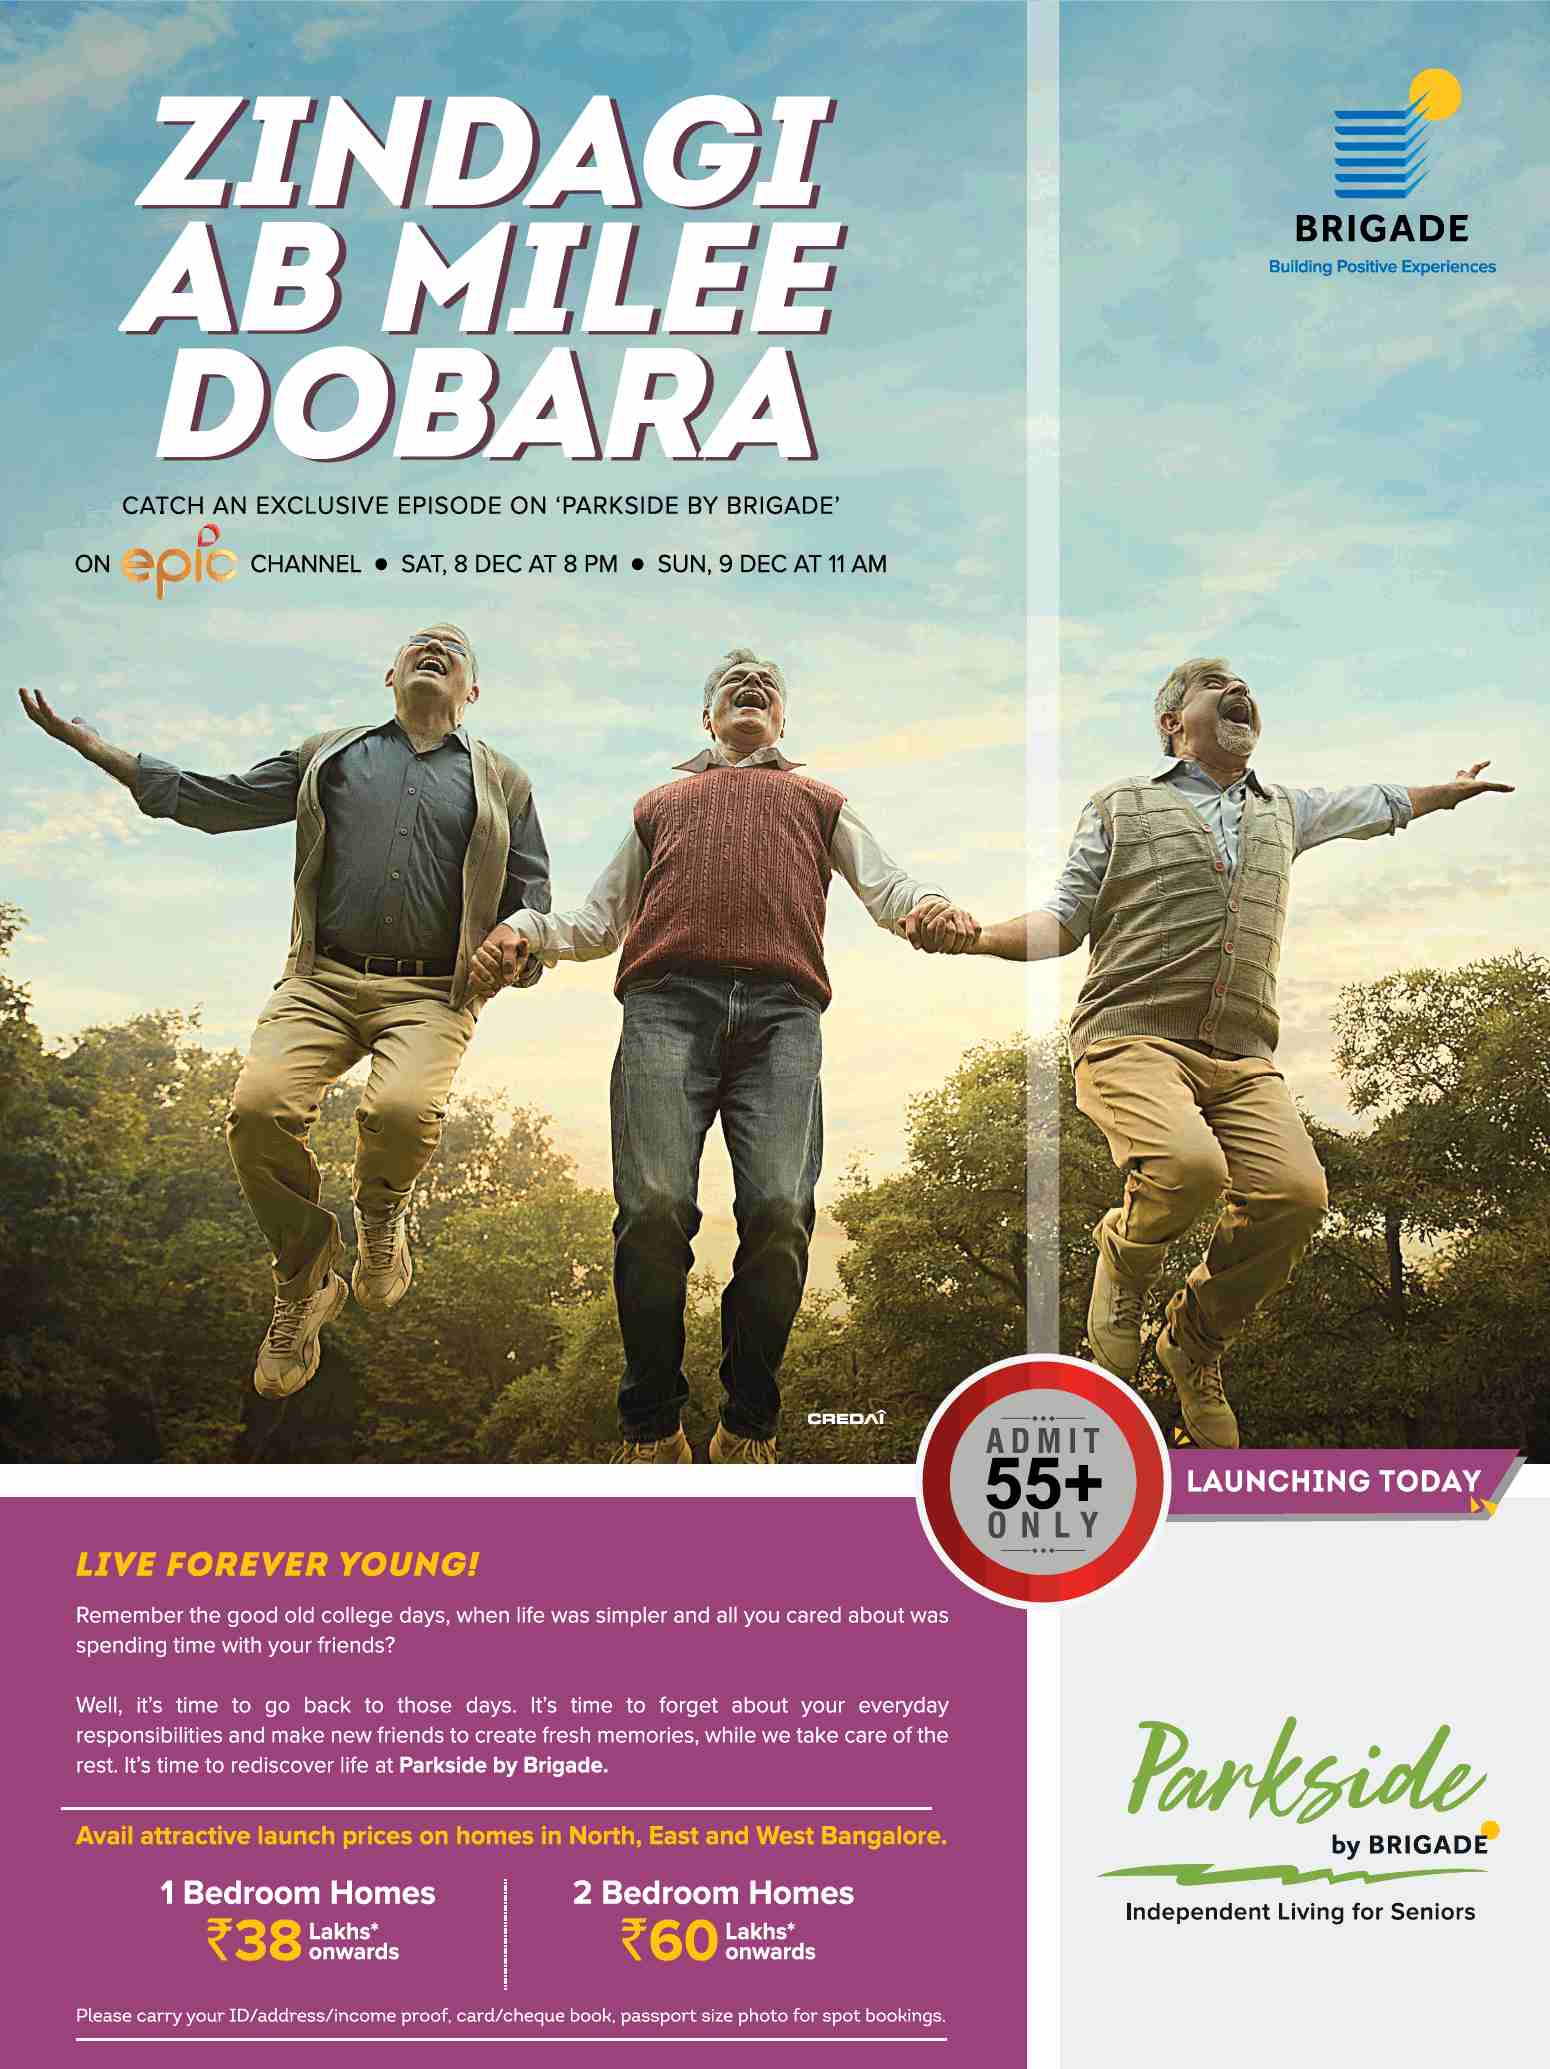 Launching Parkside by Brigade in North, East and West Bangalore